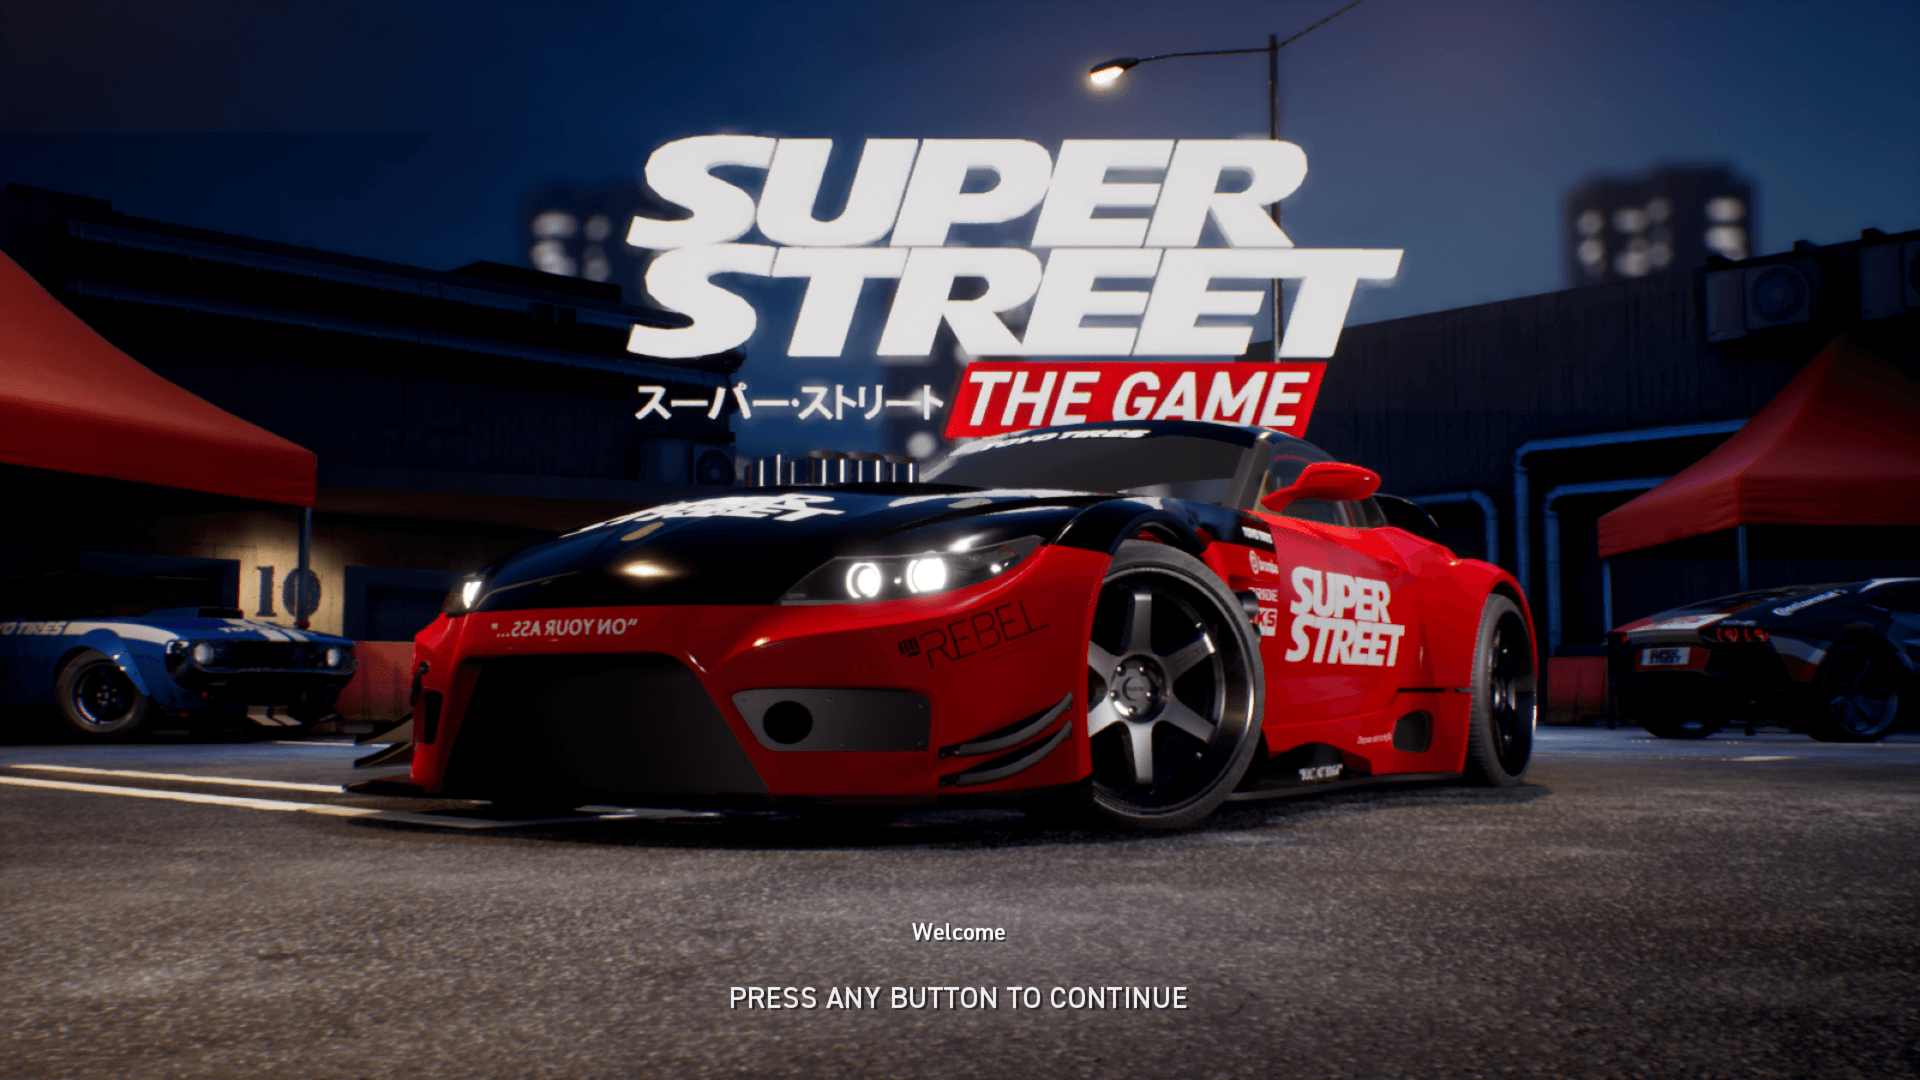 Super Street: The Game Review – V12 Monster or 1 Litre Minnow